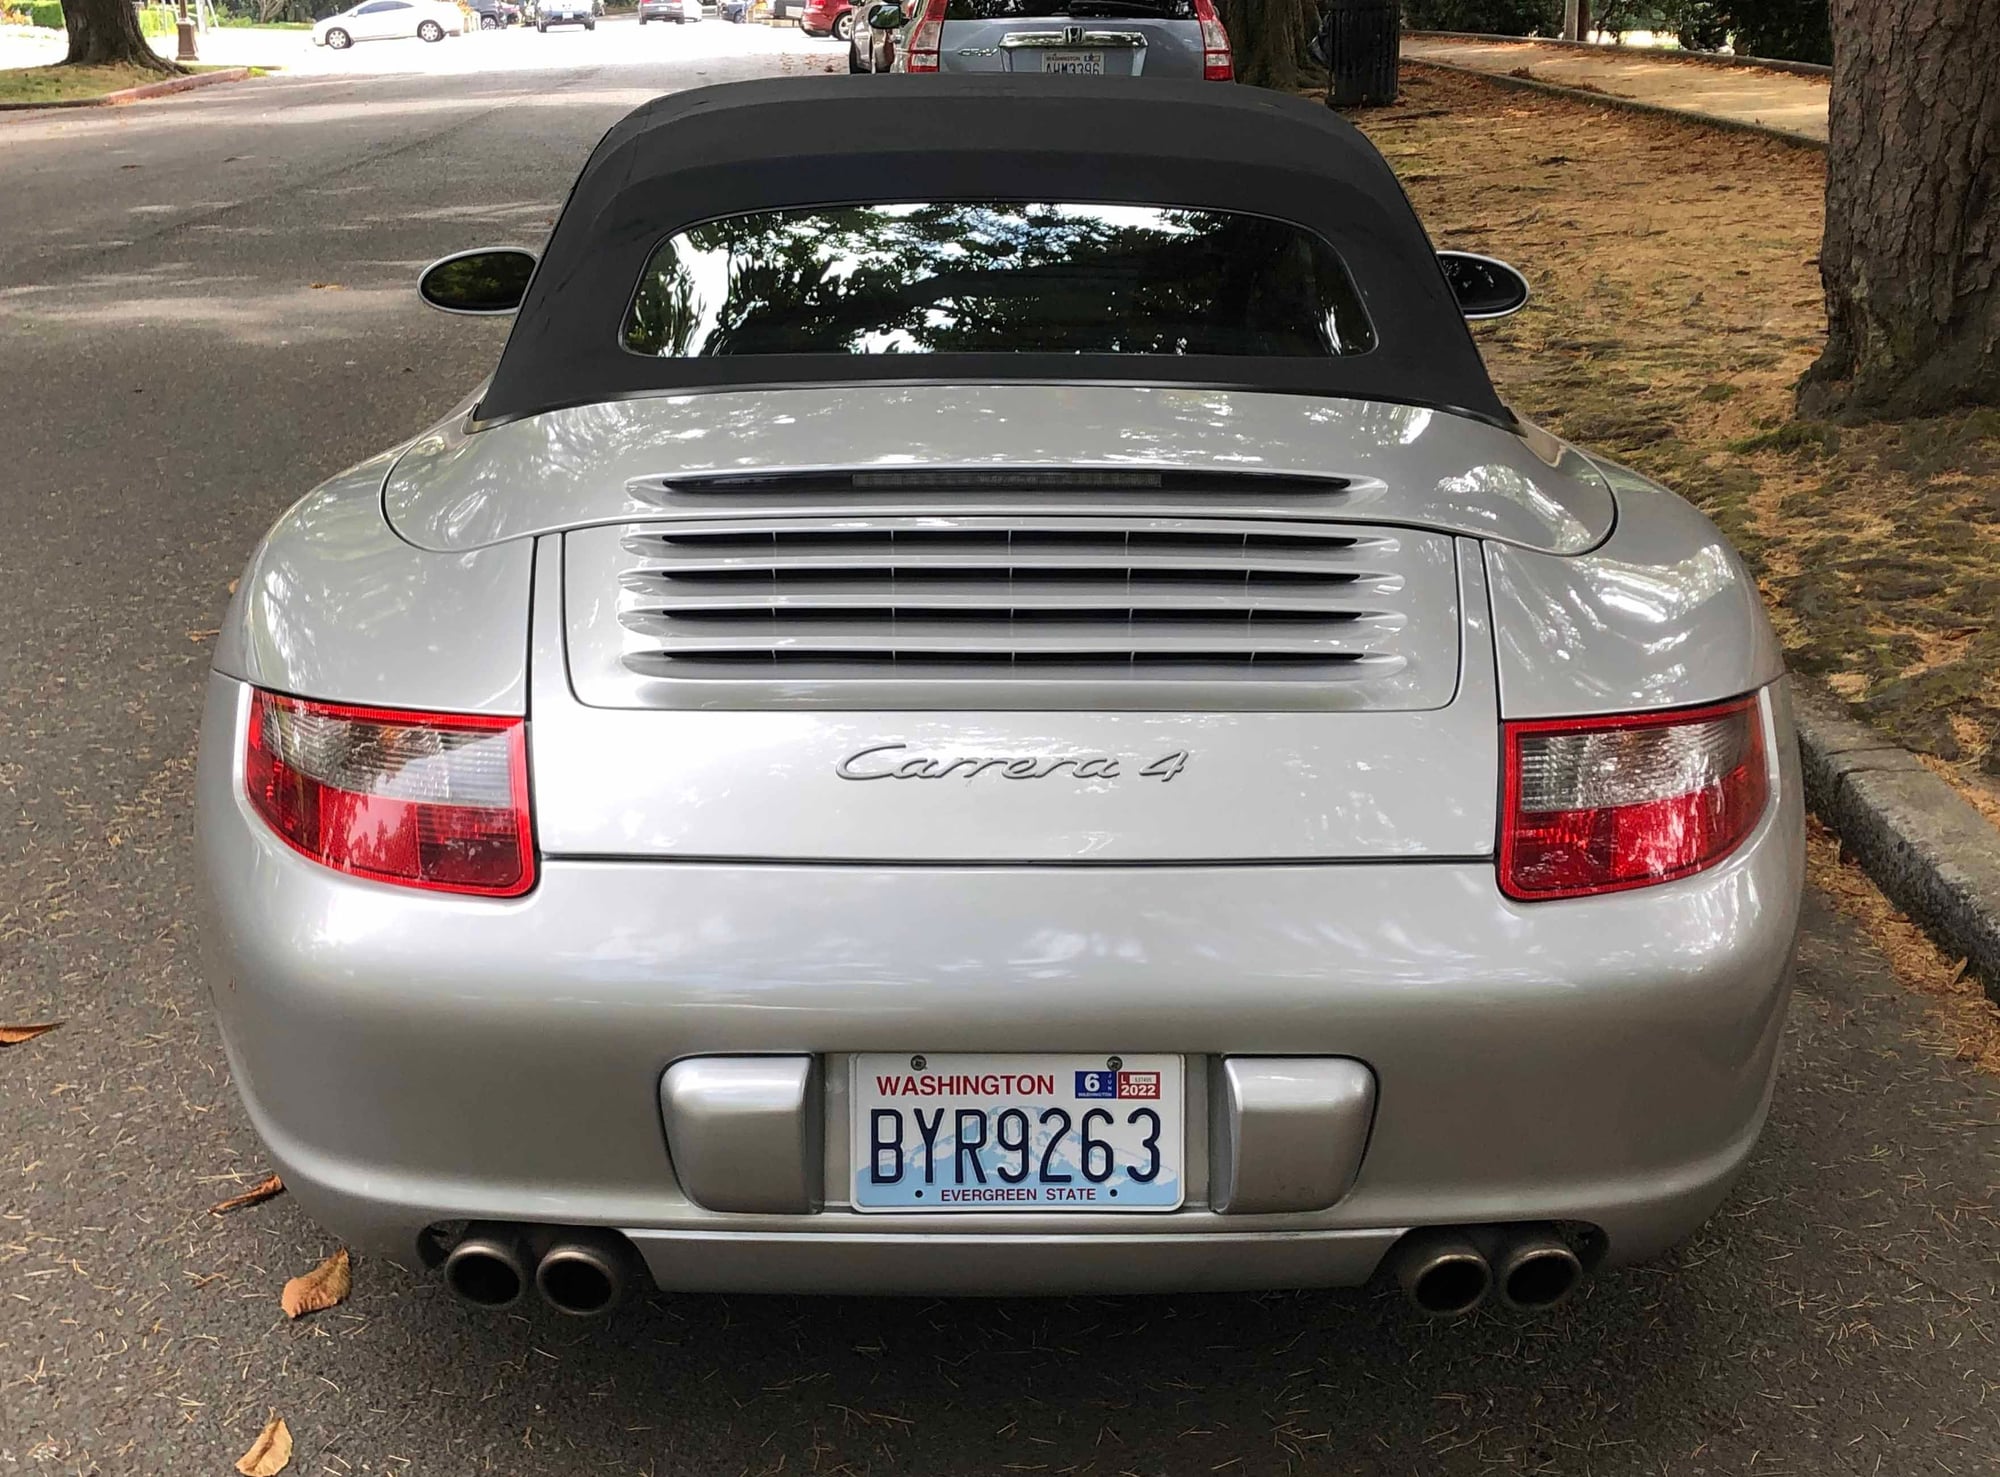 2006 Porsche 911 - 2006 997 C4 Cabriolet - Silver/Black Full Leather - Manual Trans! New Clutch/Flywheel - Used - VIN WP0CA29916S755744 - 87,600 Miles - 6 cyl - AWD - Manual - Convertible - Silver - Seattle, WA 98122, United States